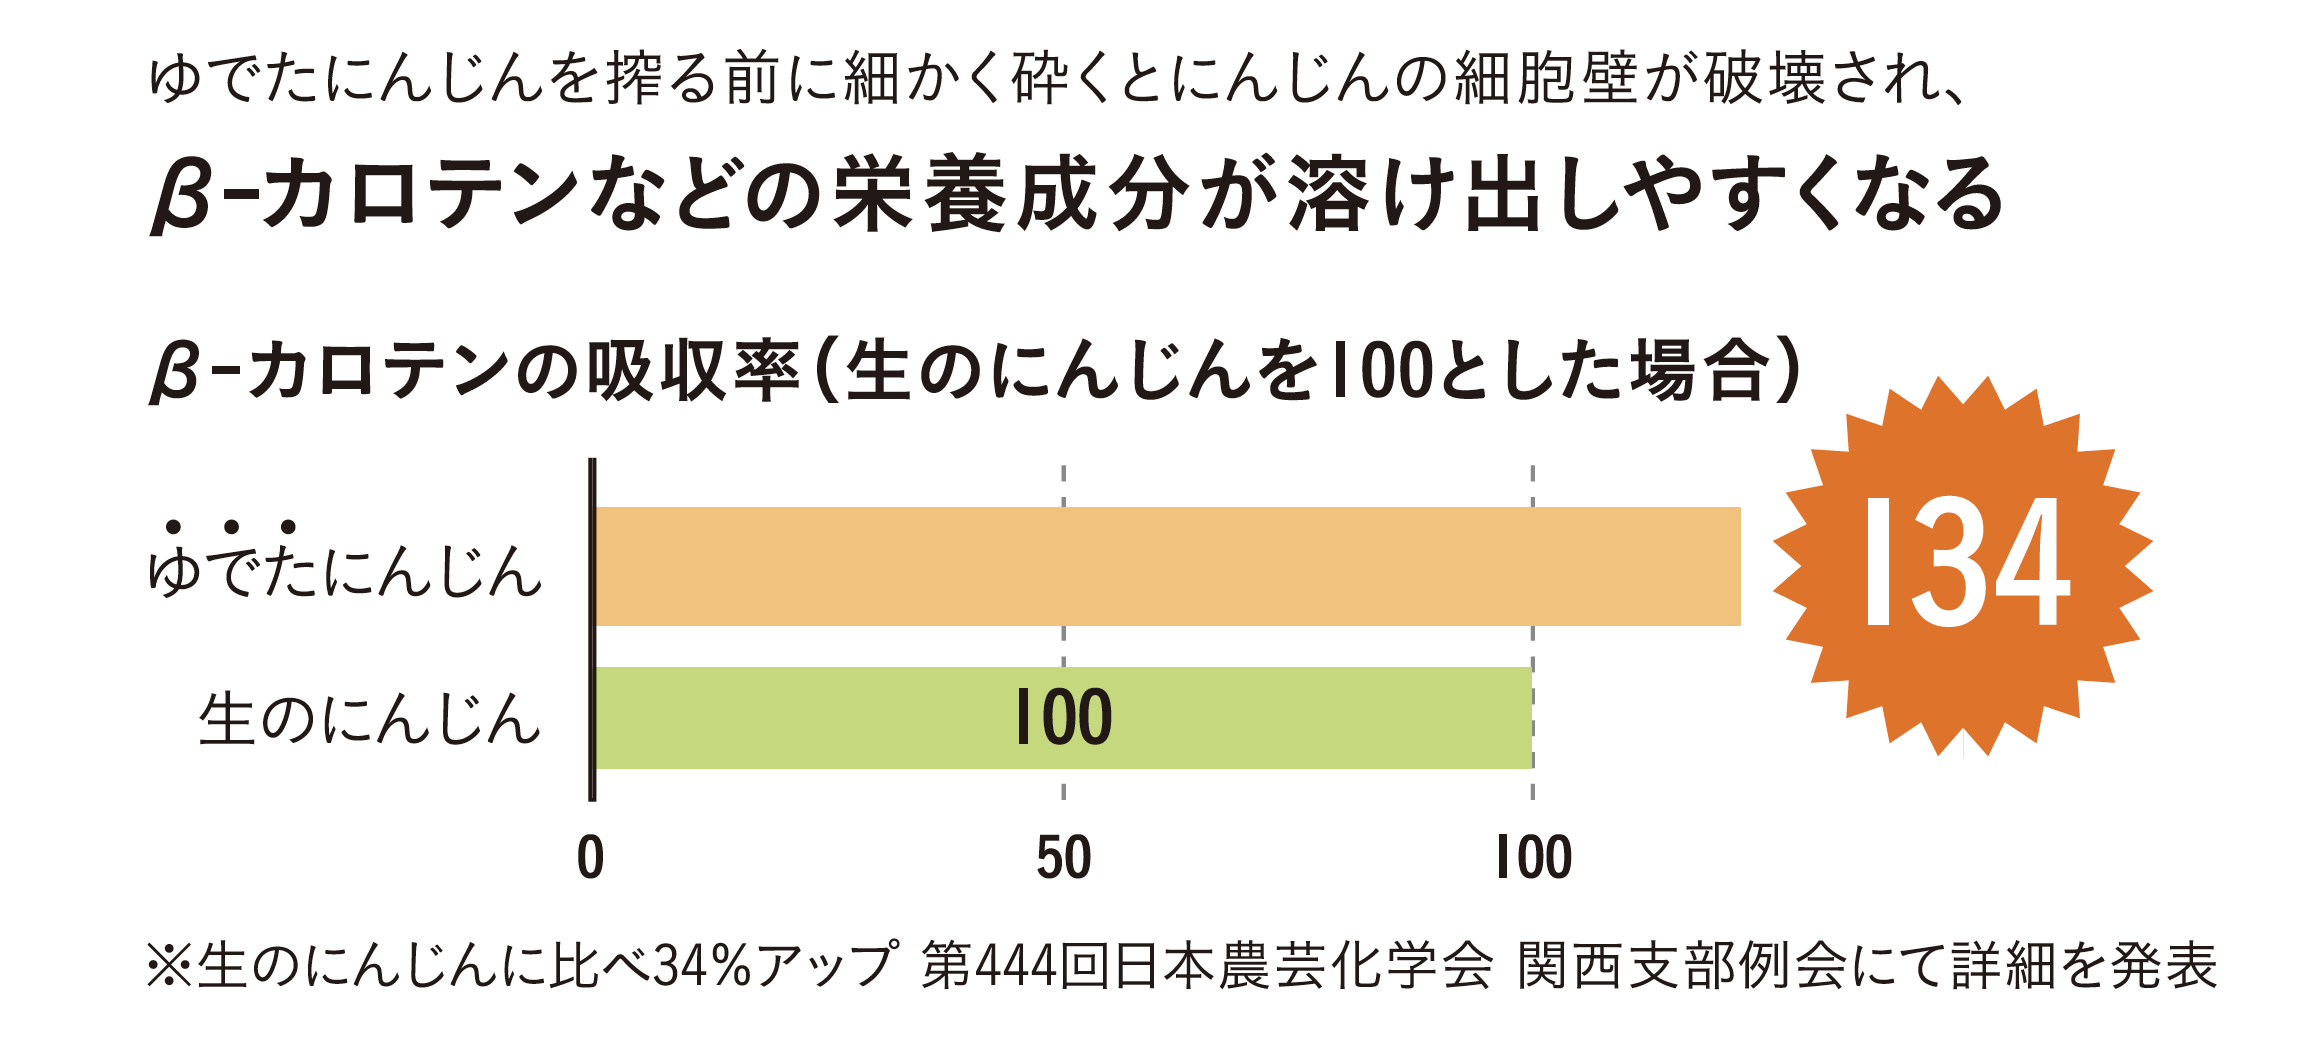 P10-11_表2.png